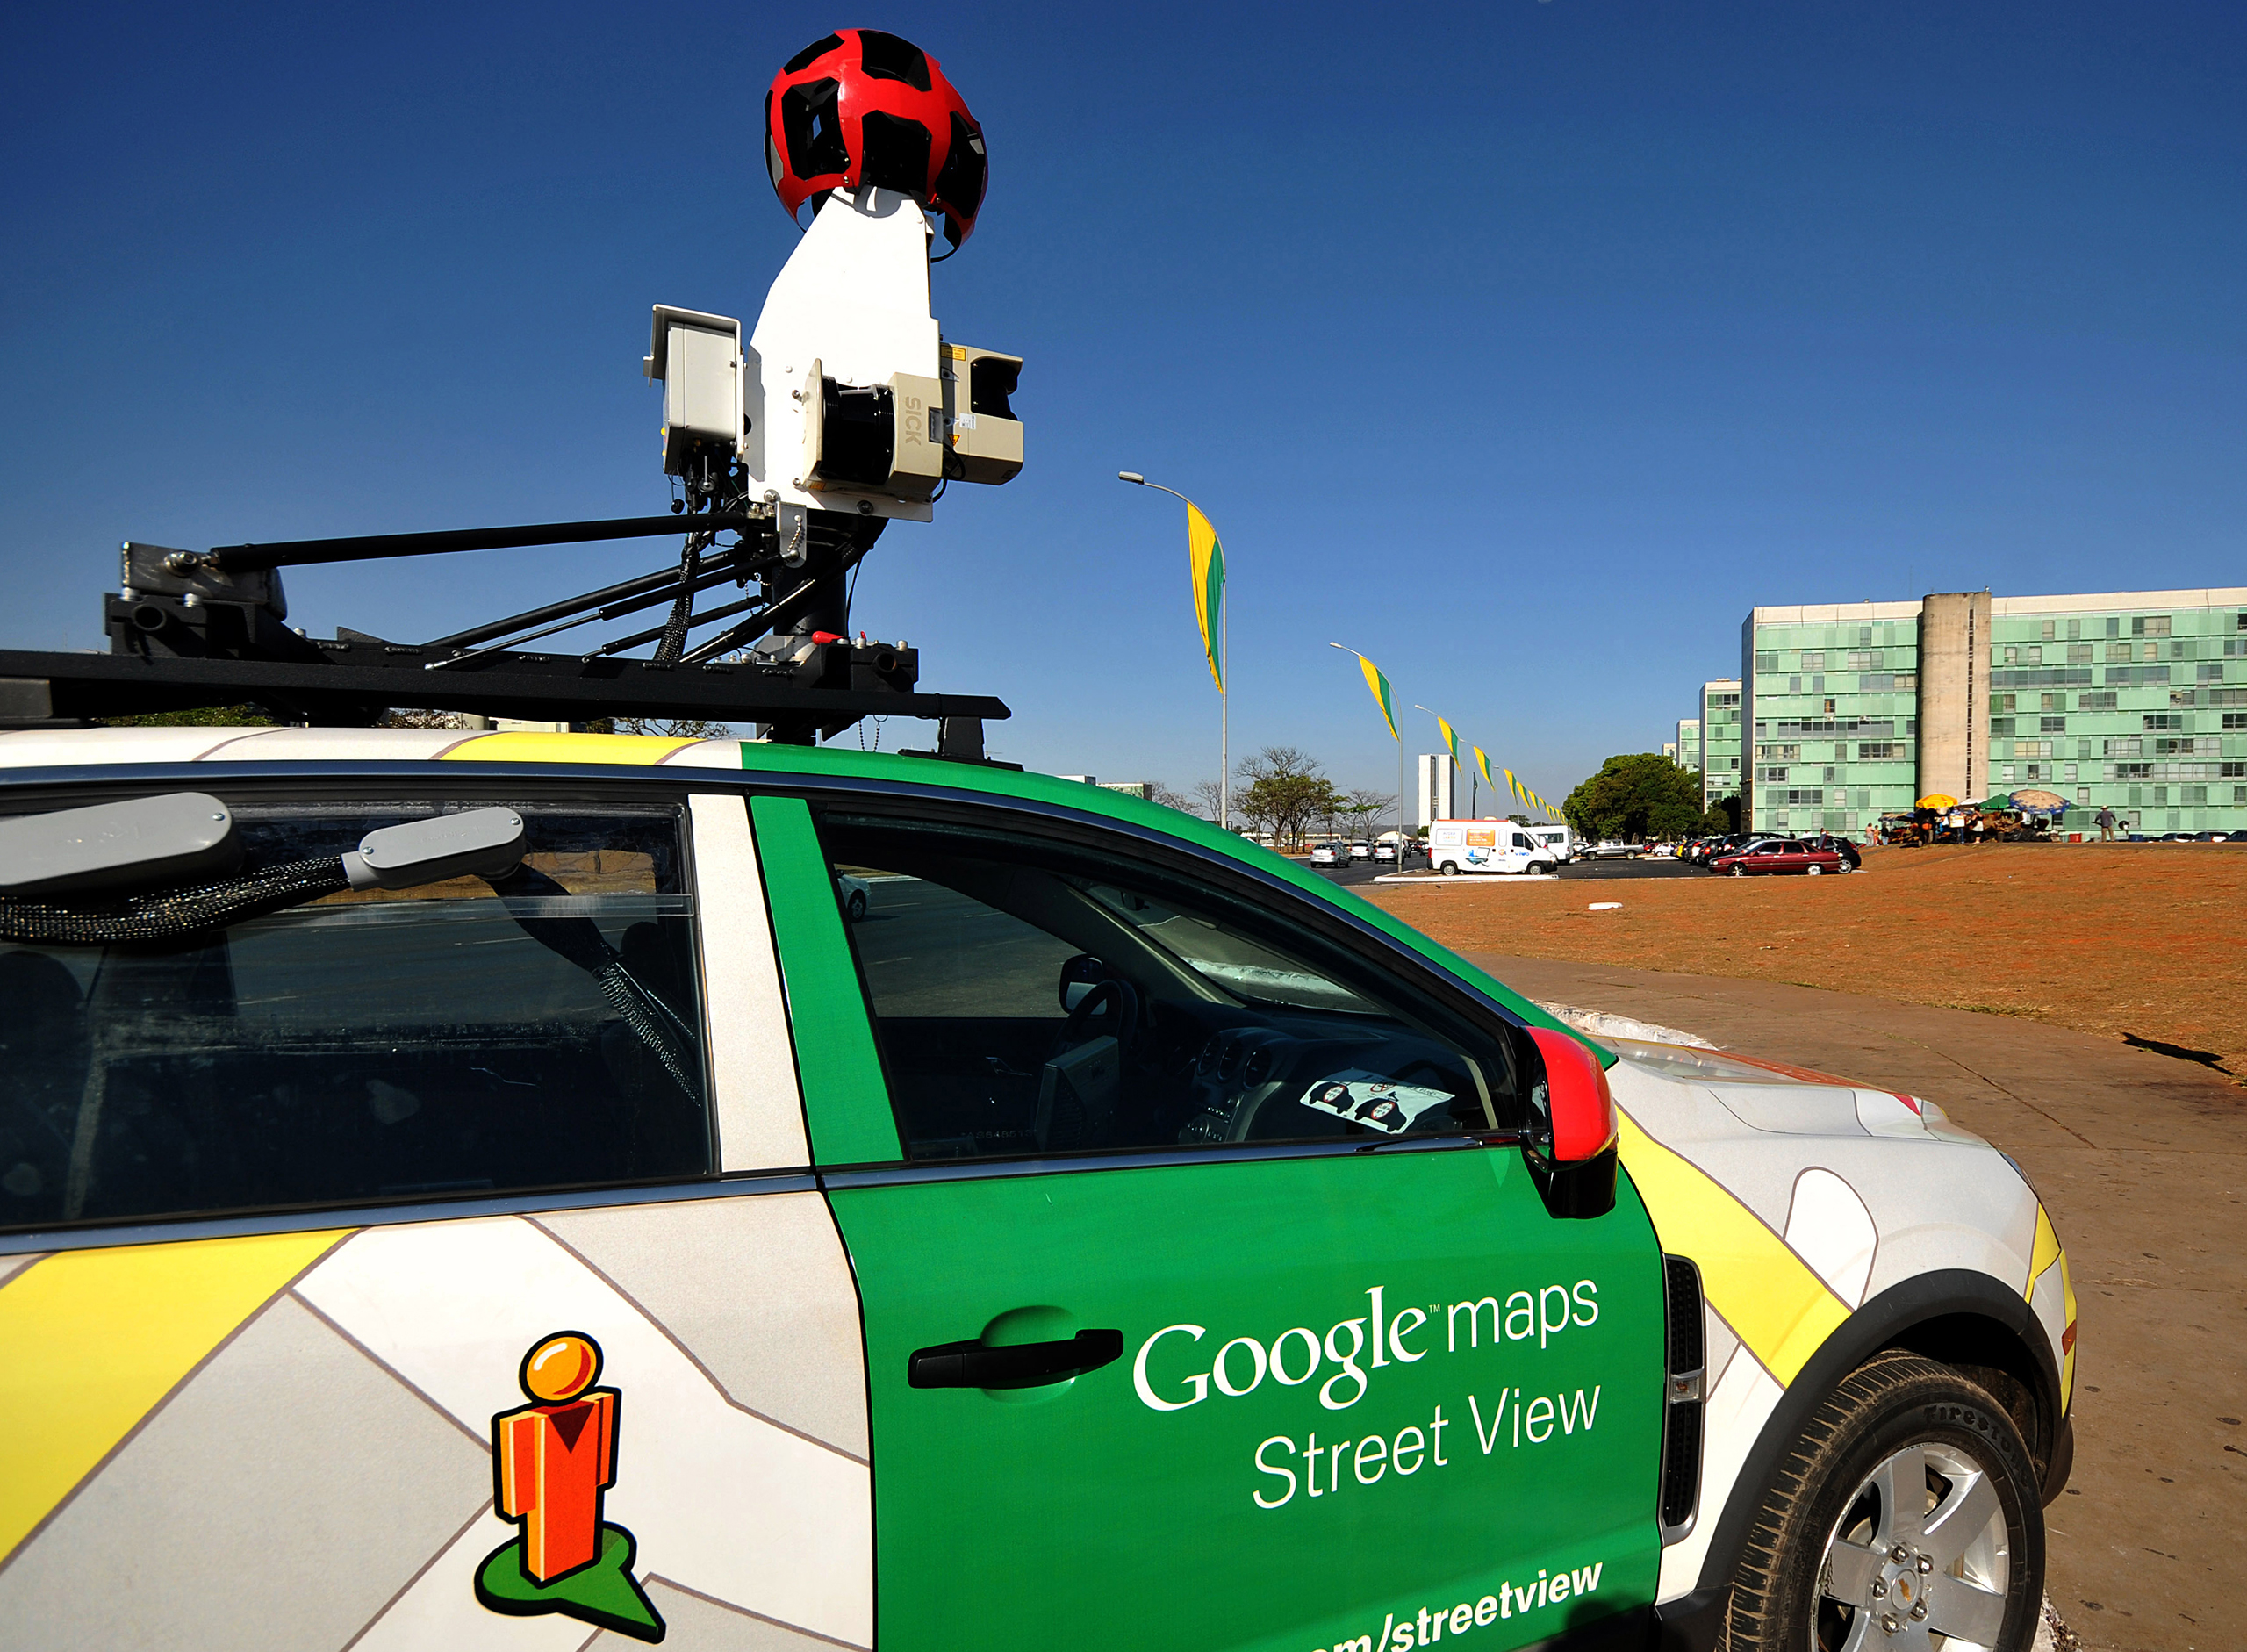 The Google street view car in the streets of Brasilia, Brazil, on Sept. 6, 2011. (Pedro Ladeira—AFP/Getty Images)